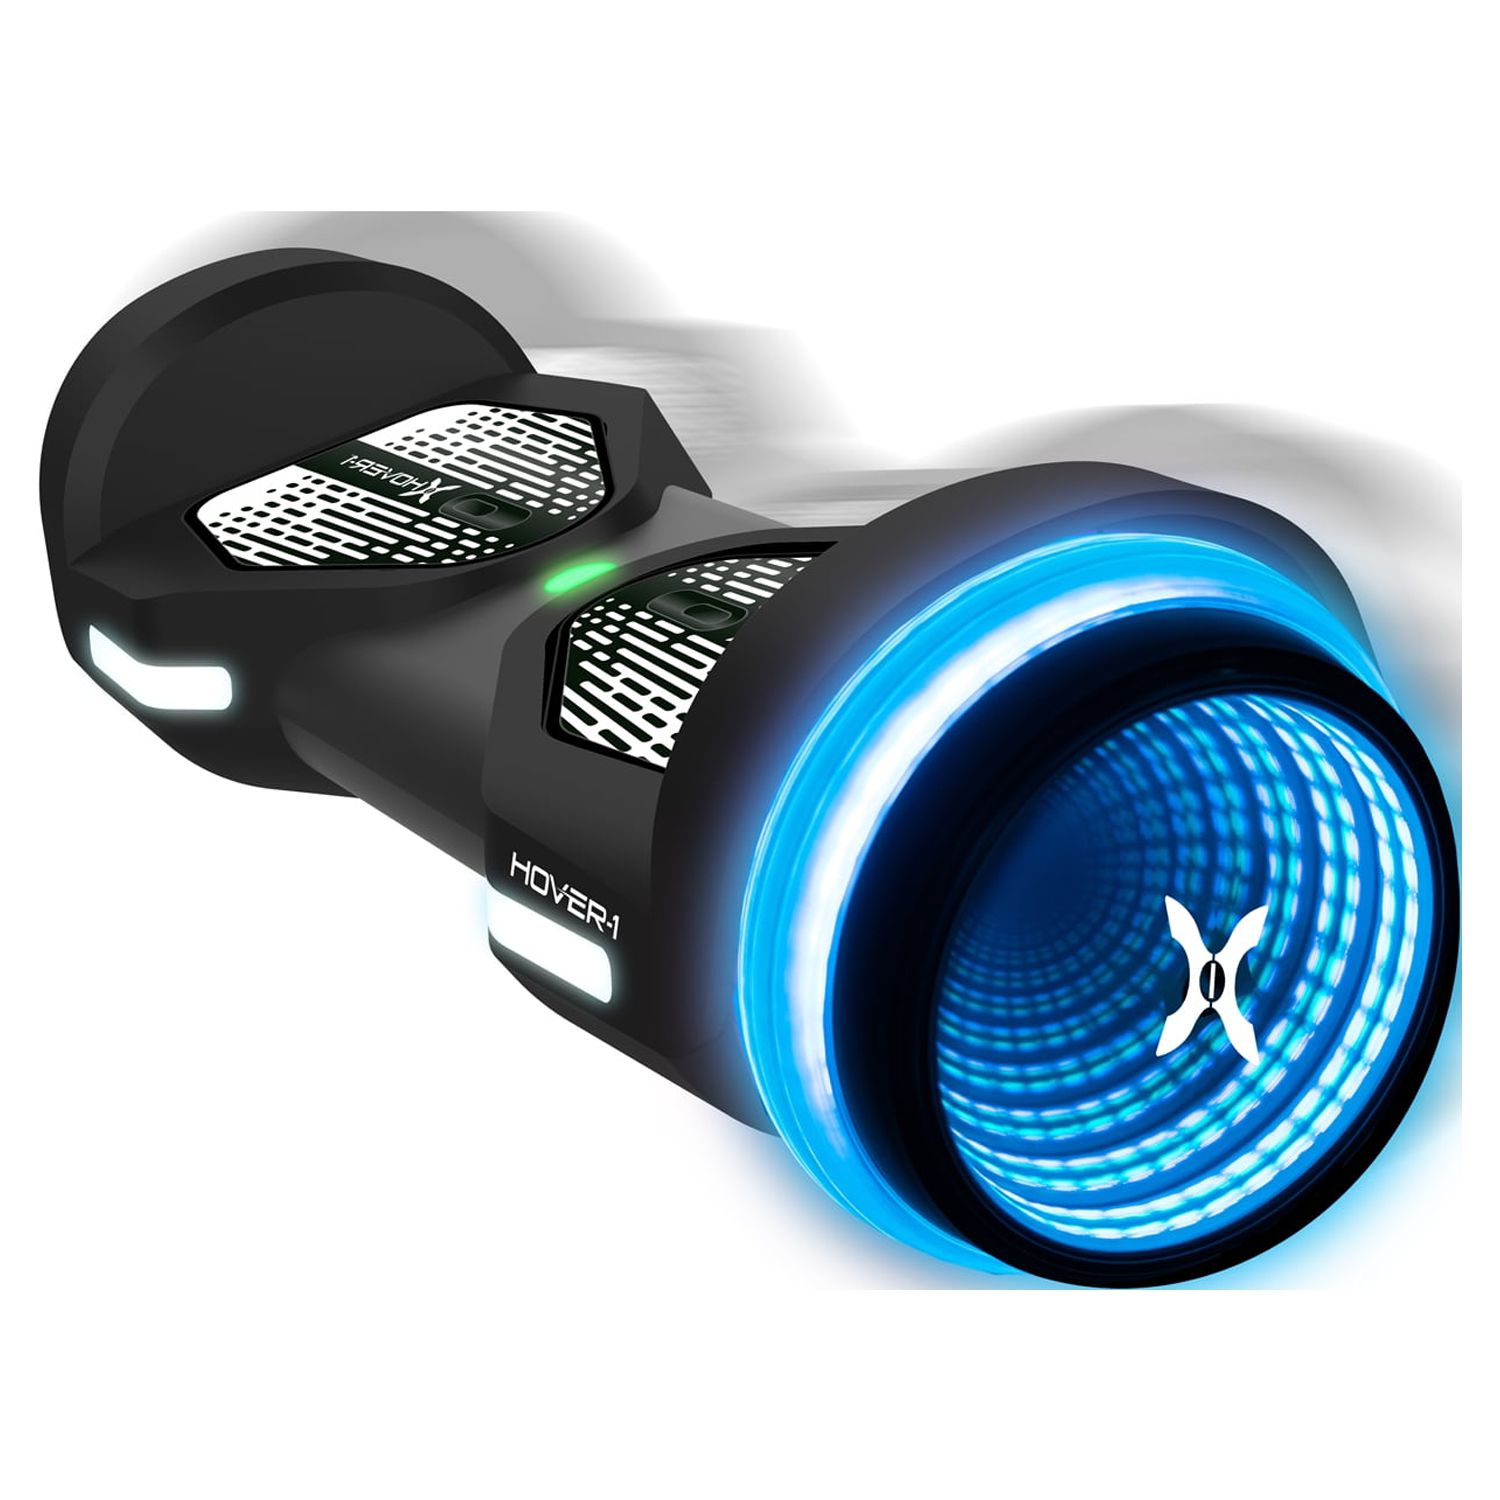 Hover-1 Allstar 2.0 Hoverboard for Teens, Black, Lightweight & Bluetooth, Max Speed 7 mph - image 4 of 6